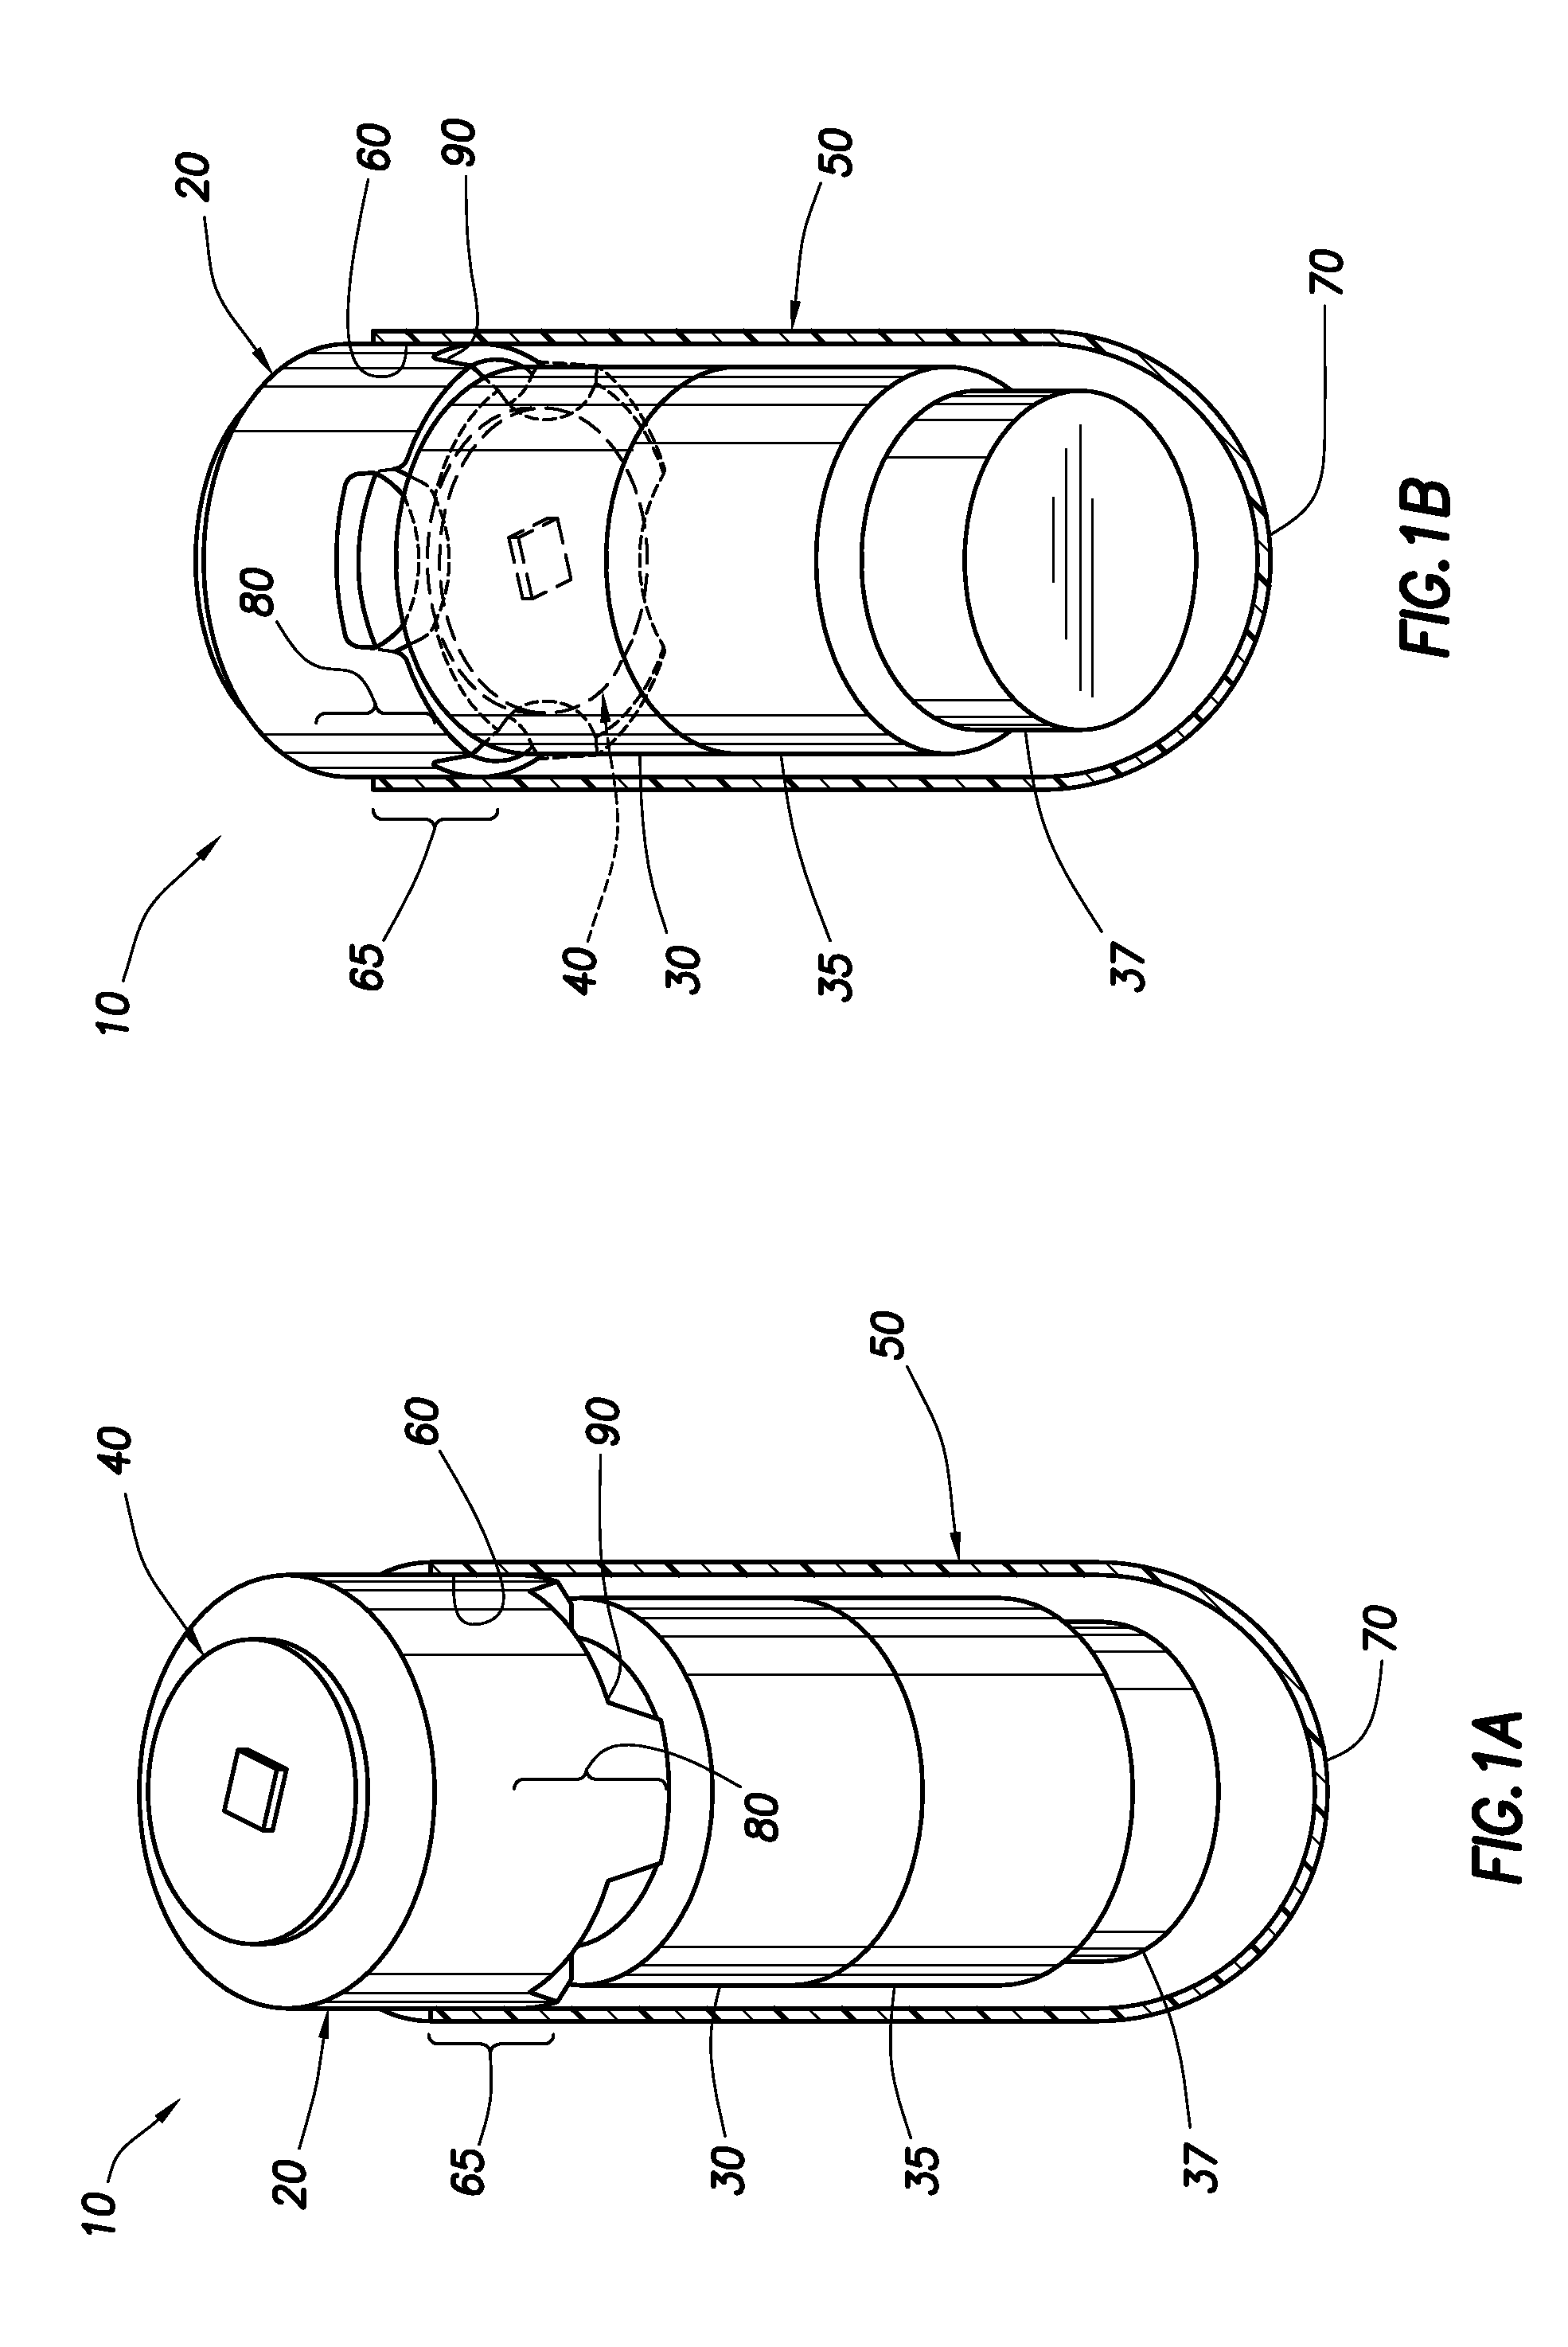 Pharmaceutical dosages delivery system